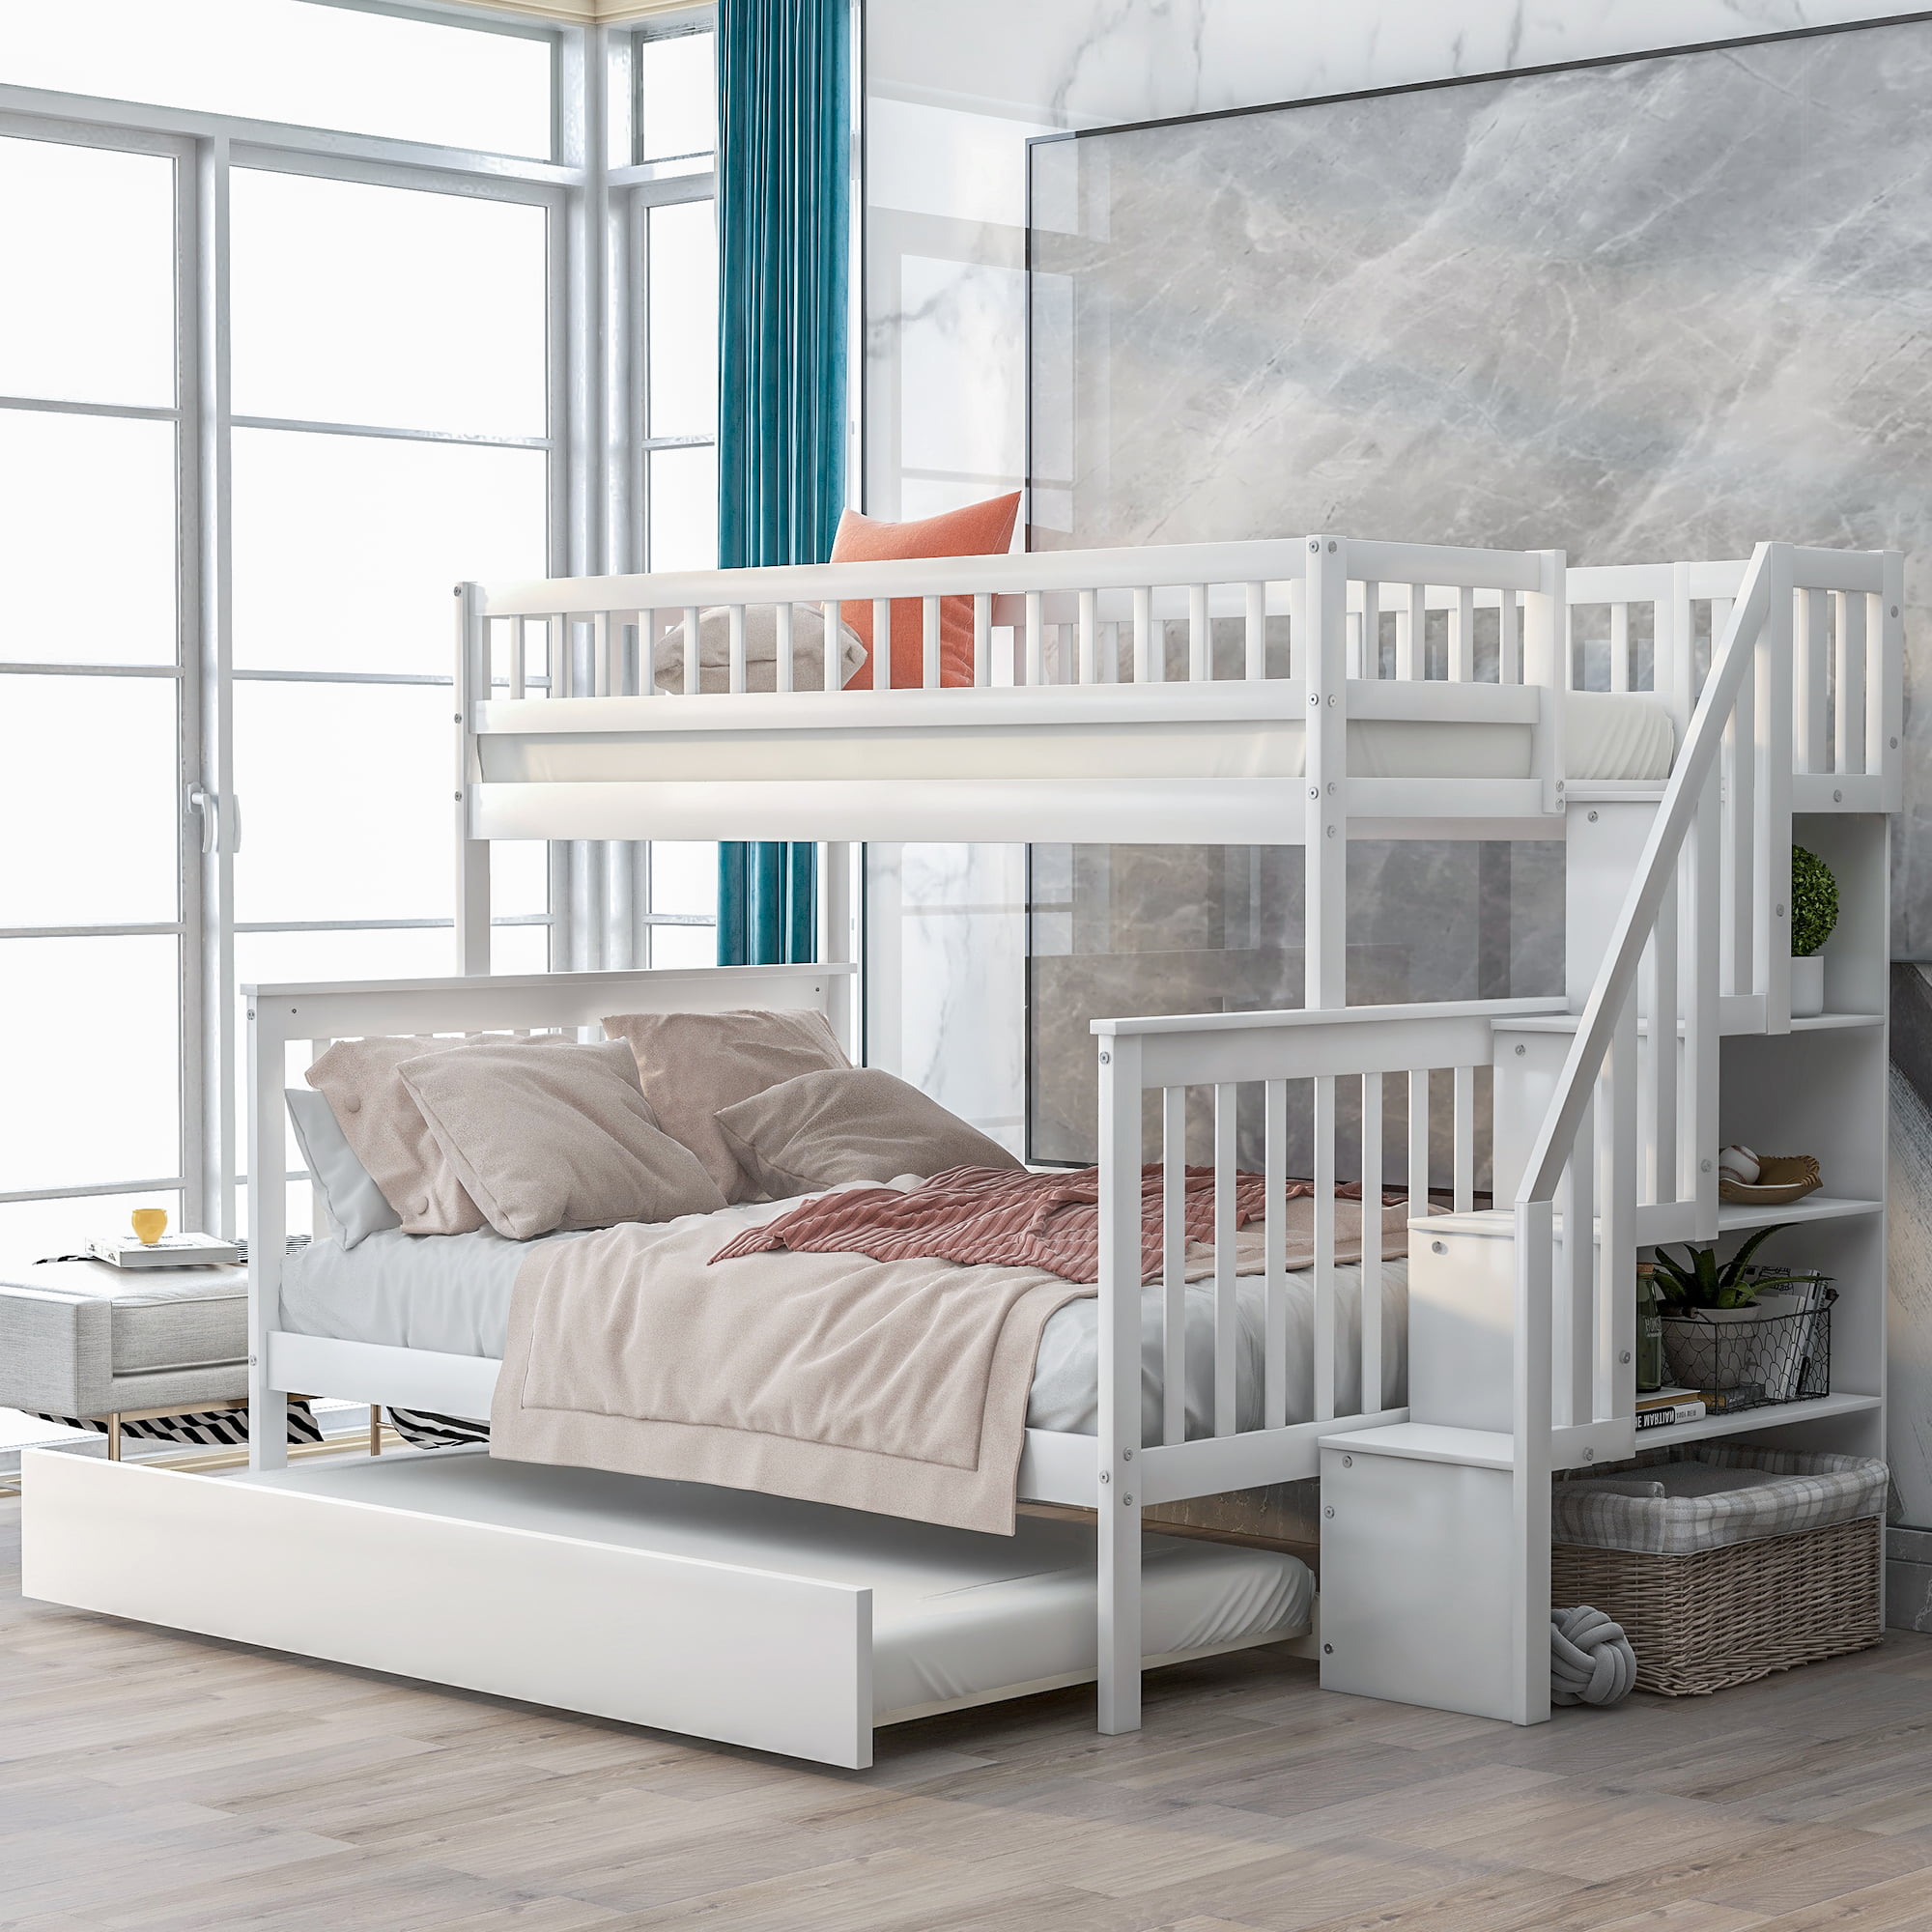 Full Mission Bunk Bed With Twin Trundle, Twin Double Bunk Bed With Trundle